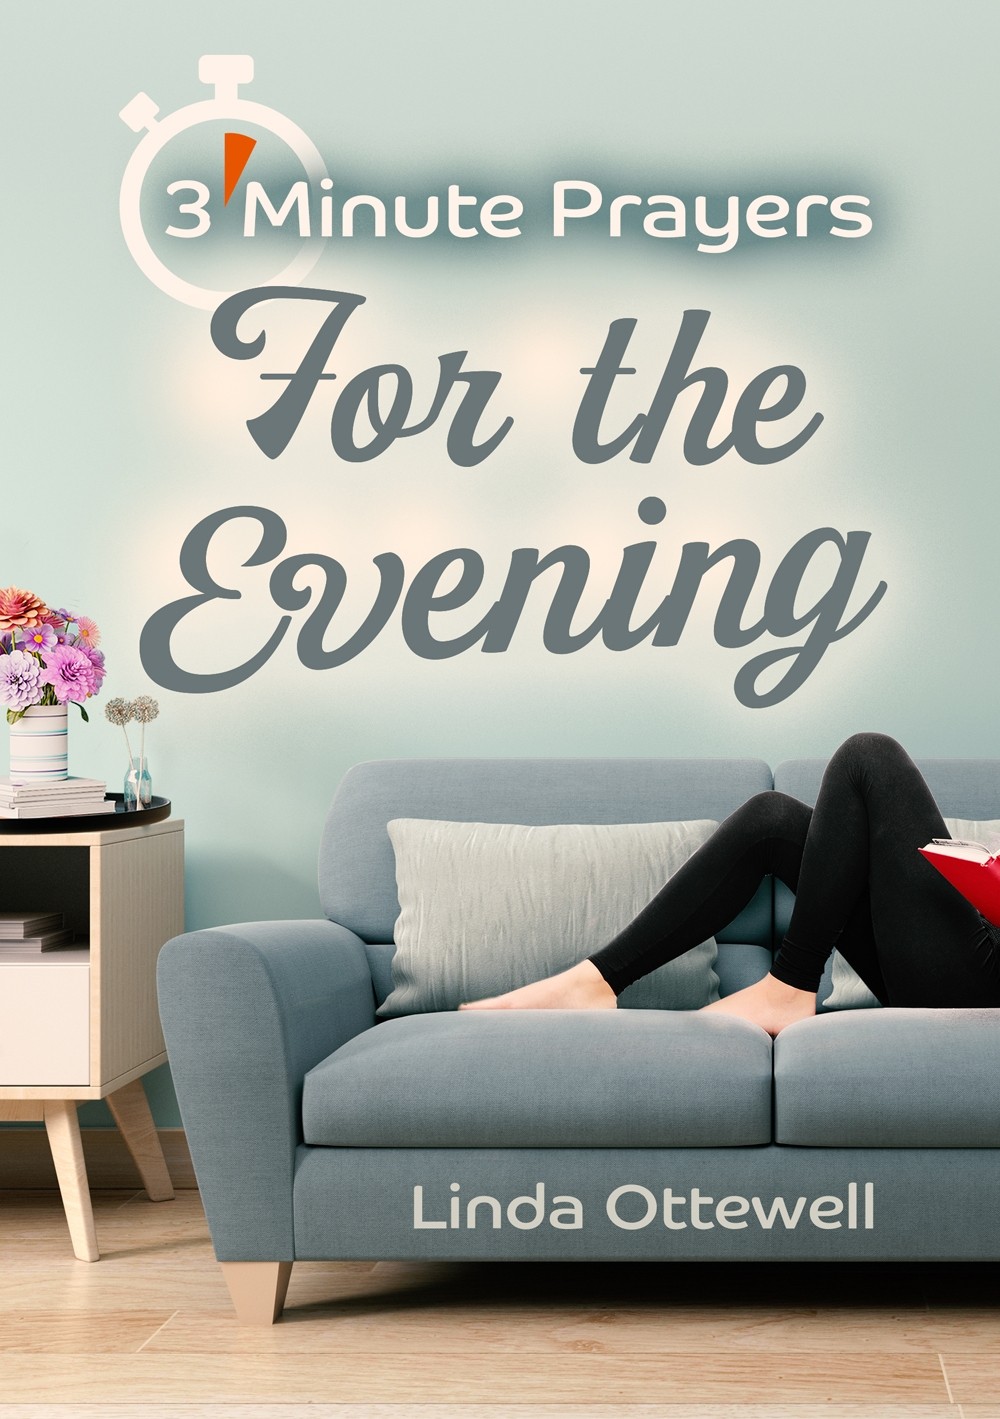 3 MINUTE PRAYERS FOR THE EVENING